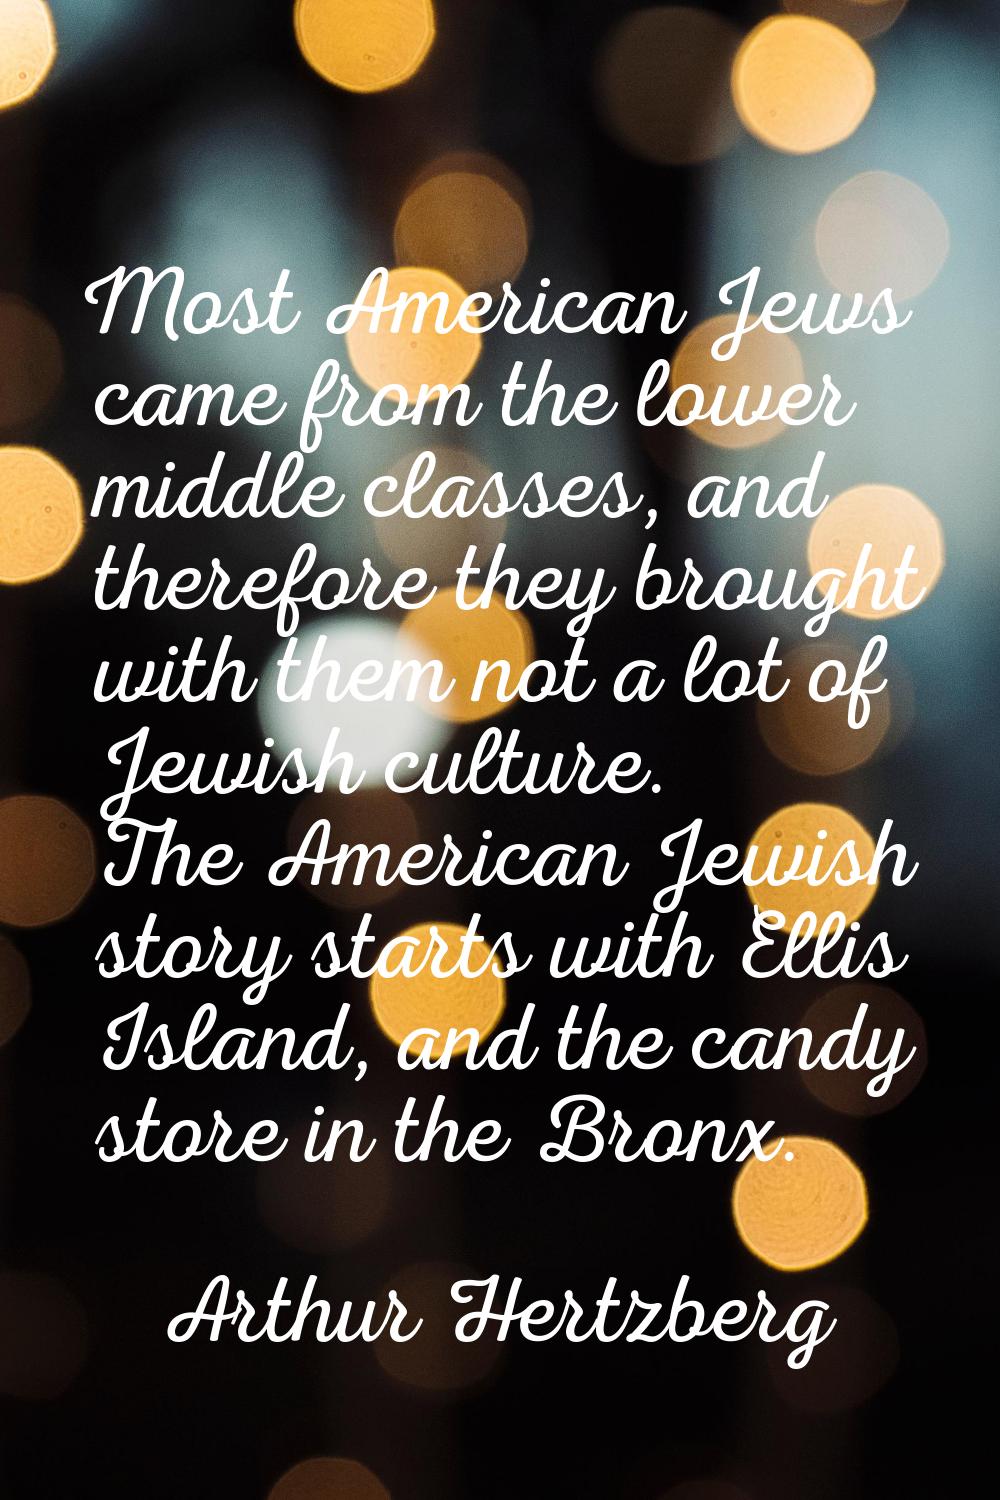 Most American Jews came from the lower middle classes, and therefore they brought with them not a l